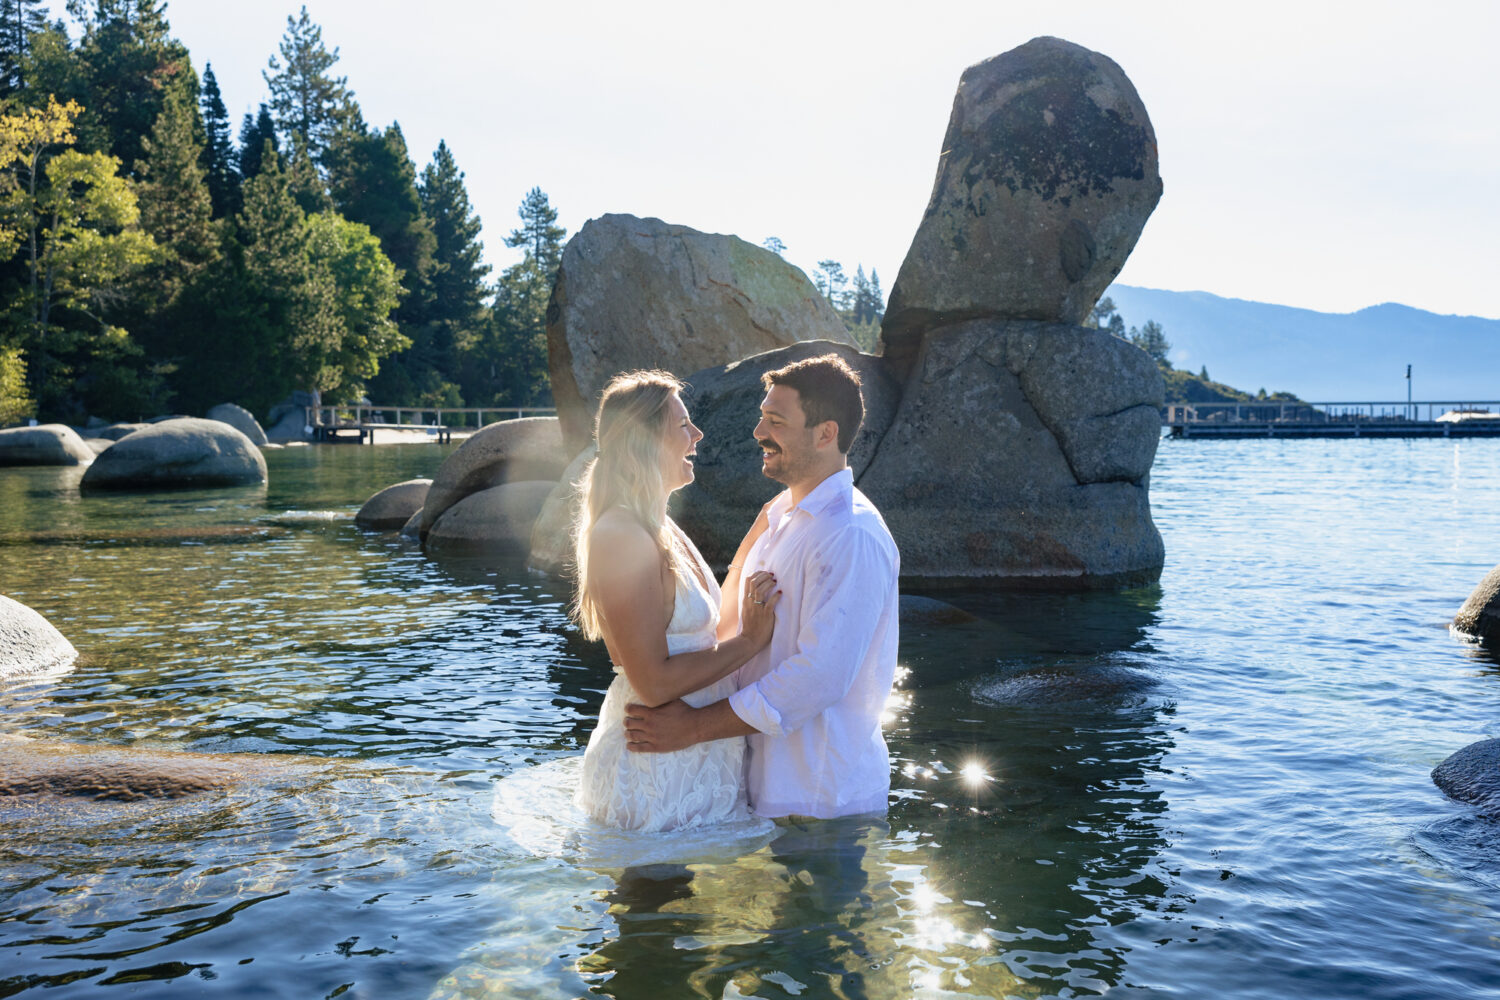 A romantic photoshoot at a beach in Lake Tahoe.